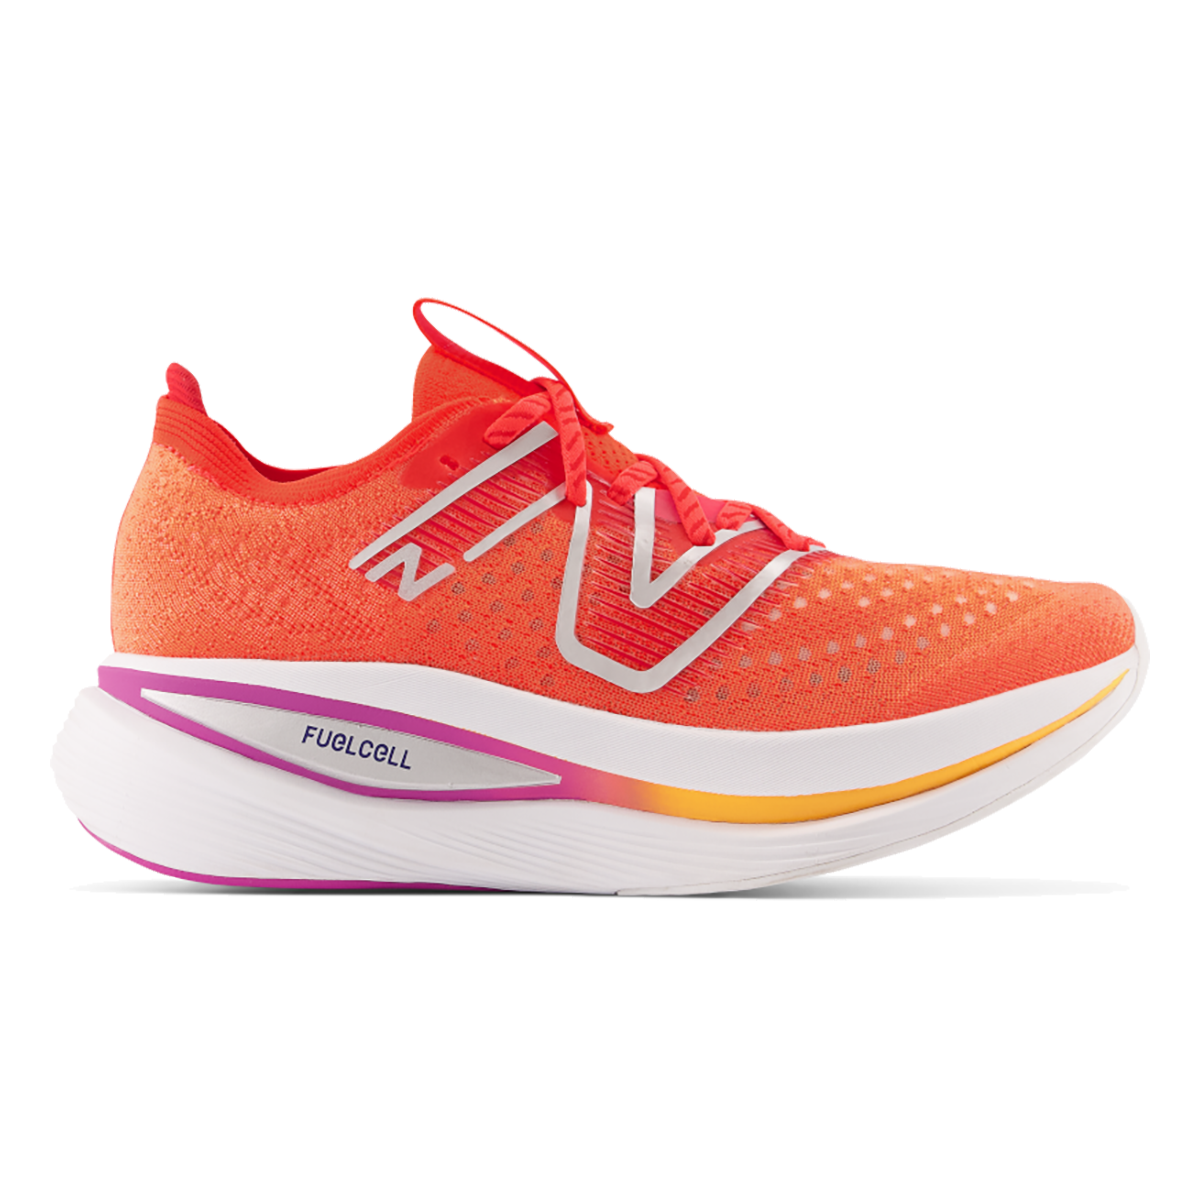 New Balance Men's Fuel Cell SuperComp Trainer Shoes in Electric Red/Silver Metallic   Size: 8.5 Width: D   Fit2Run